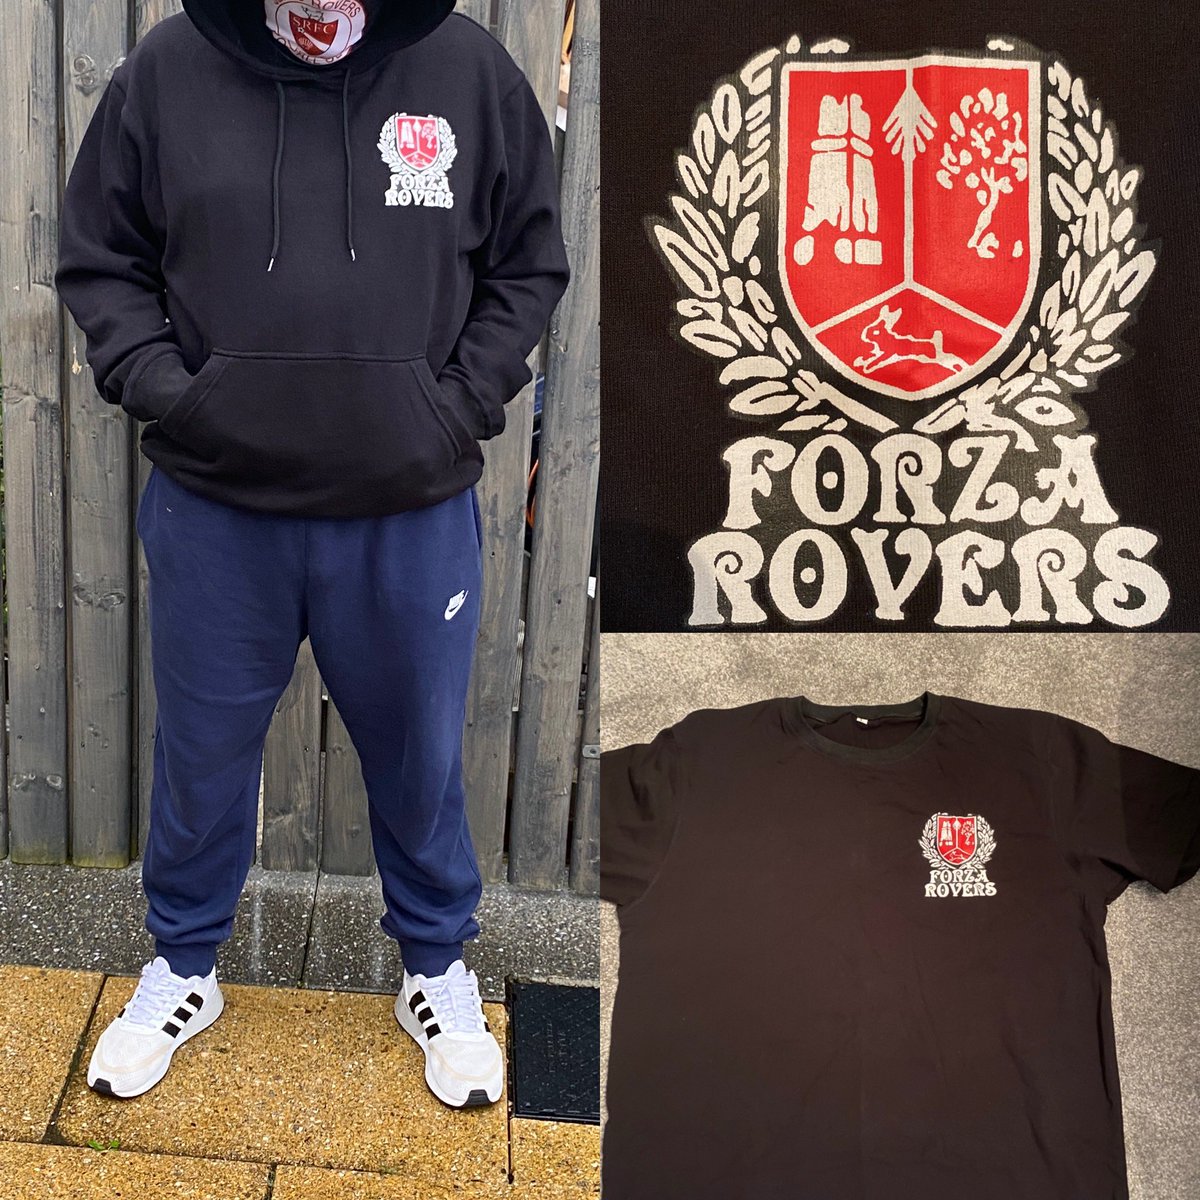 New @FR08_Official merch on the way. Hoodie €35, tee €18. Special deal both for €45. Orders and €10 deposit will be take at The Shed (tea n coffee hut) half time v Pats. All money goes to @sligorovers Thanks to @FR08_Official